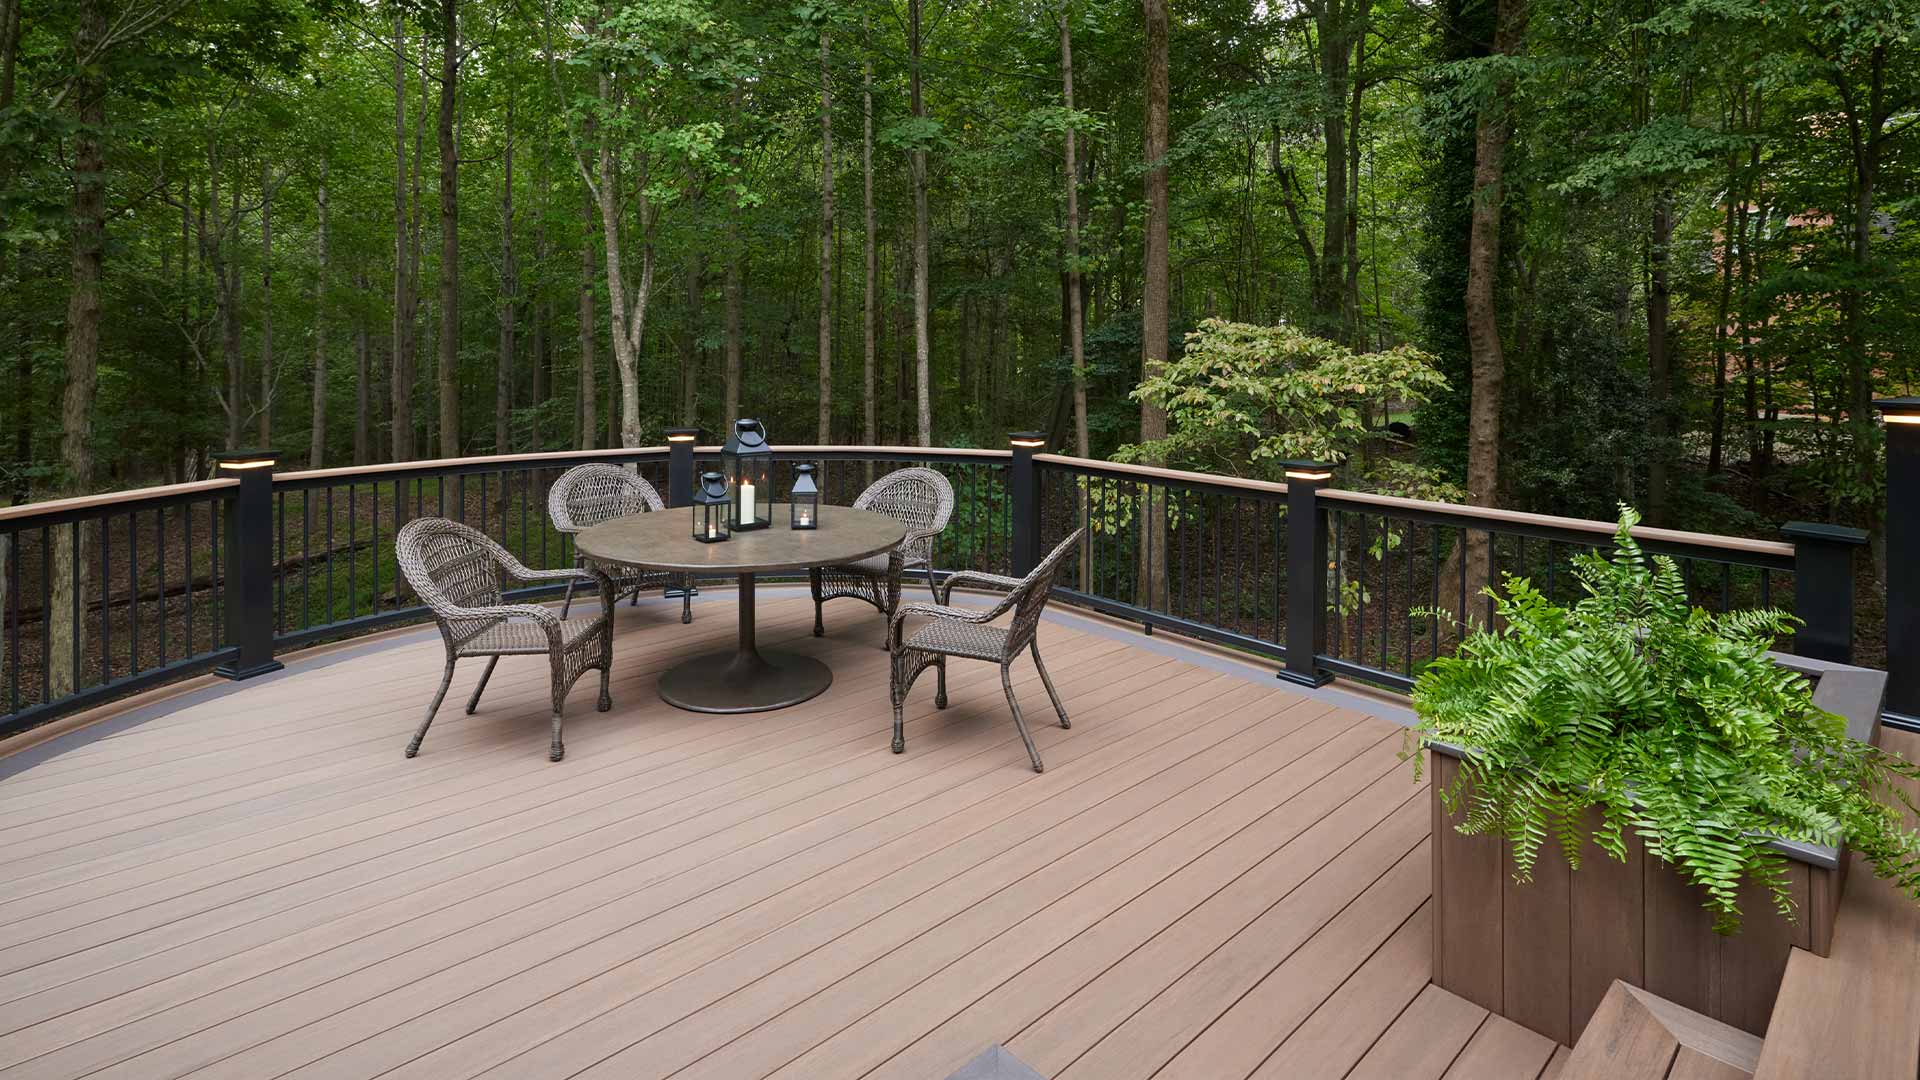 Secluded deck surrounded by forest